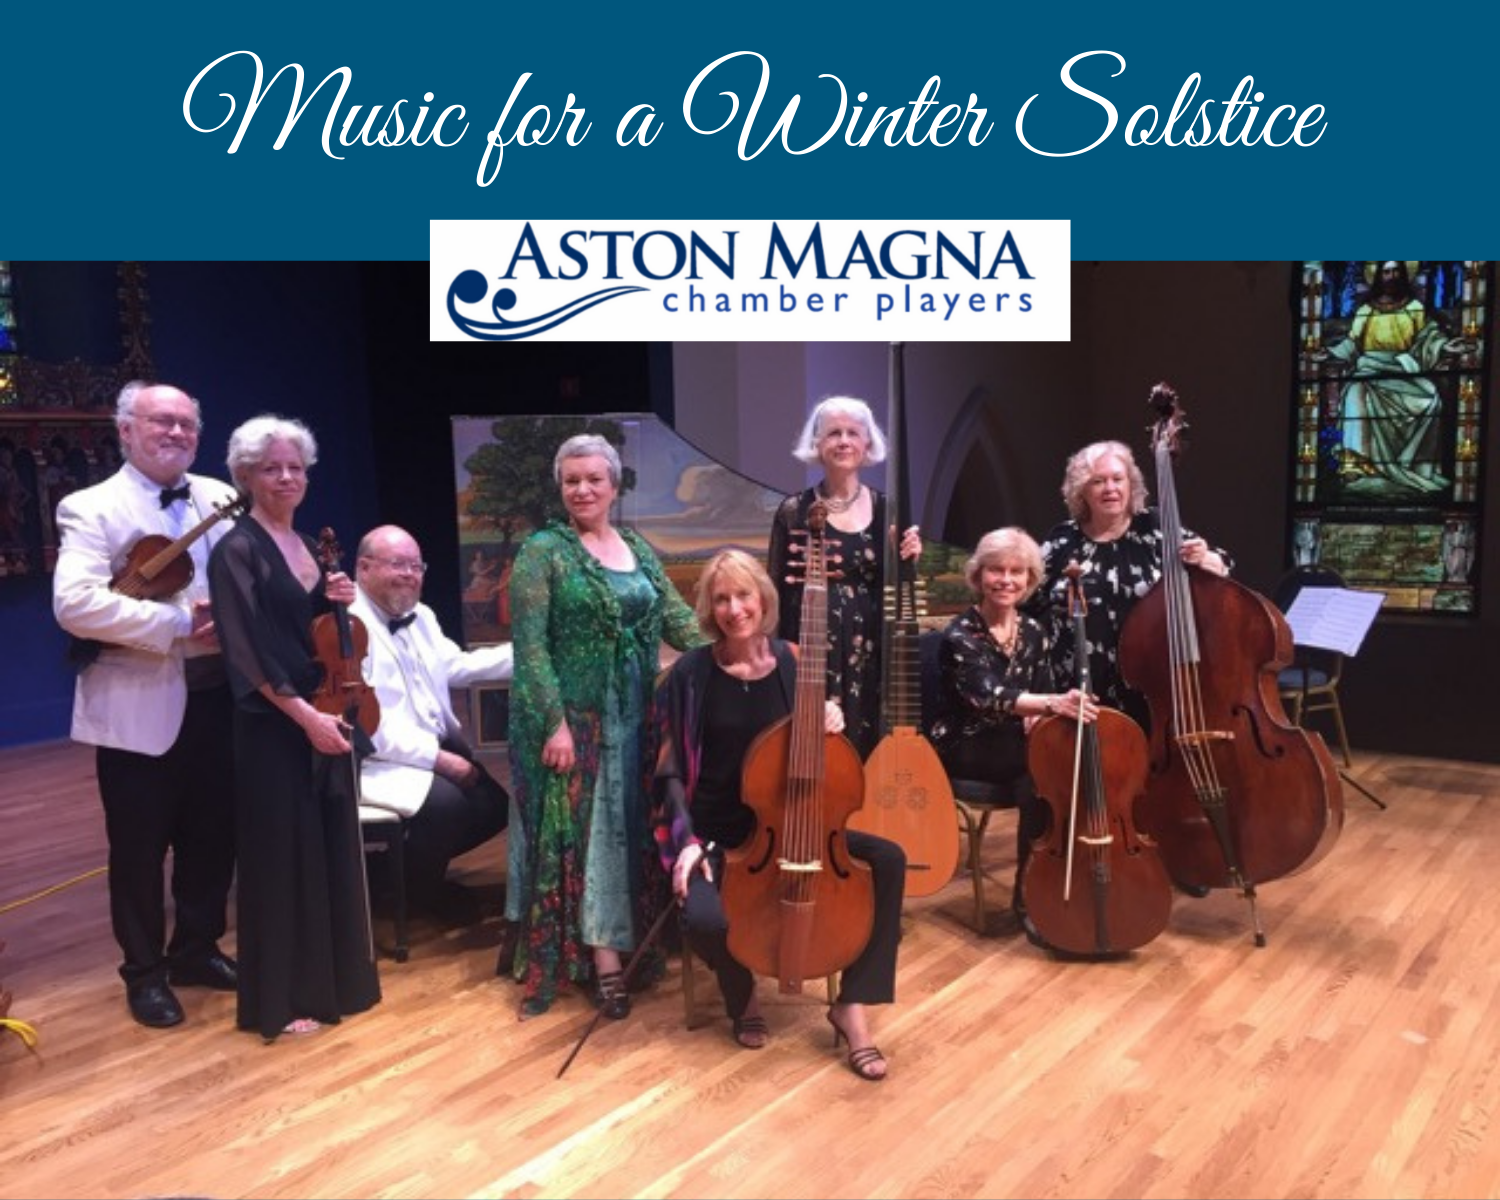 Aston Magna Chamber Players: Music for a Winter Solstice